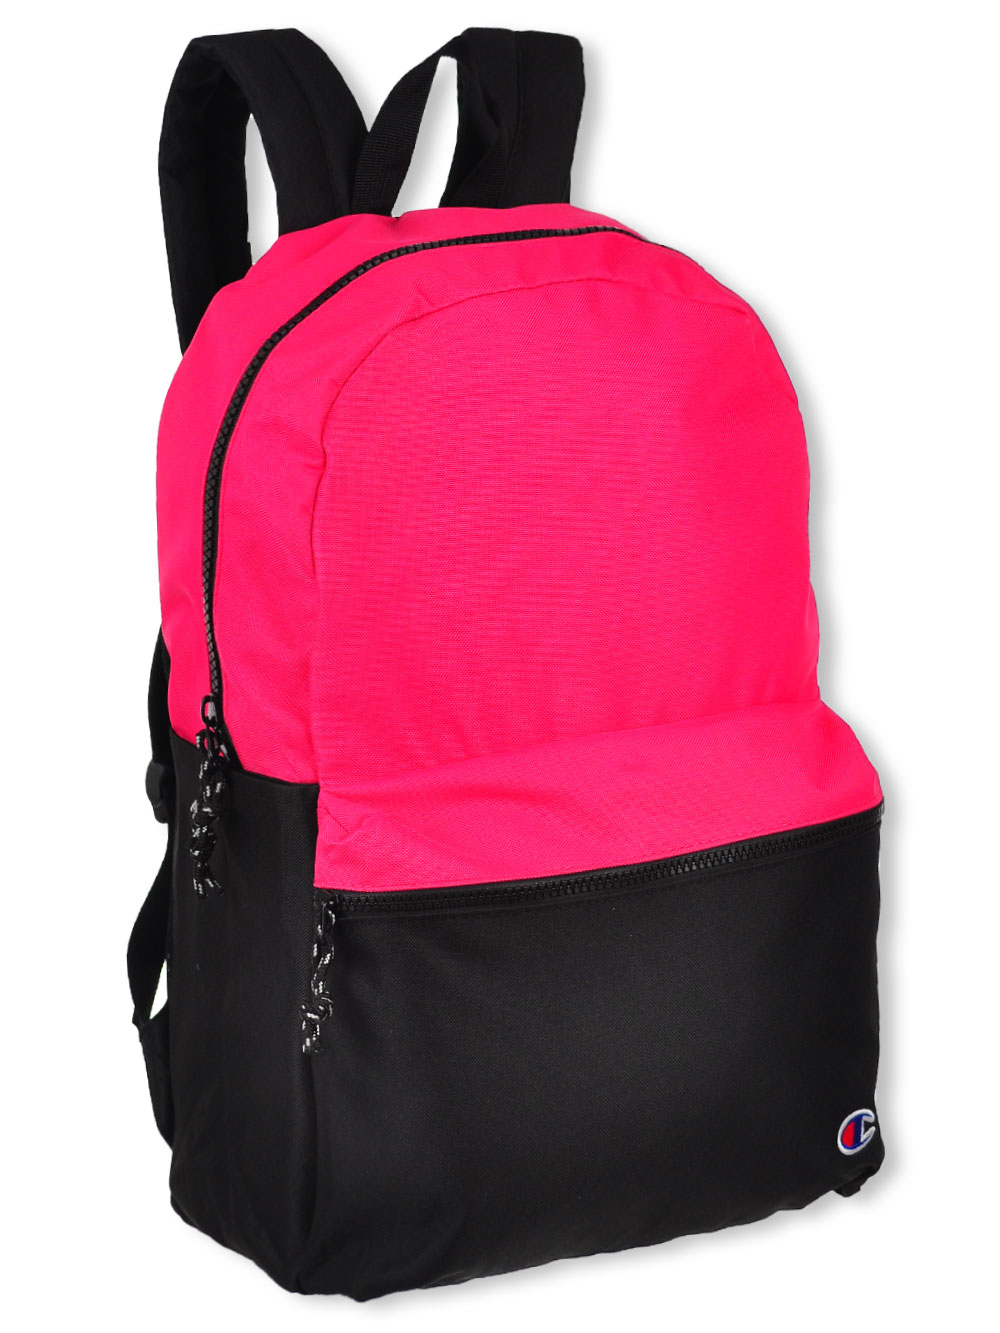 champion backpack pink